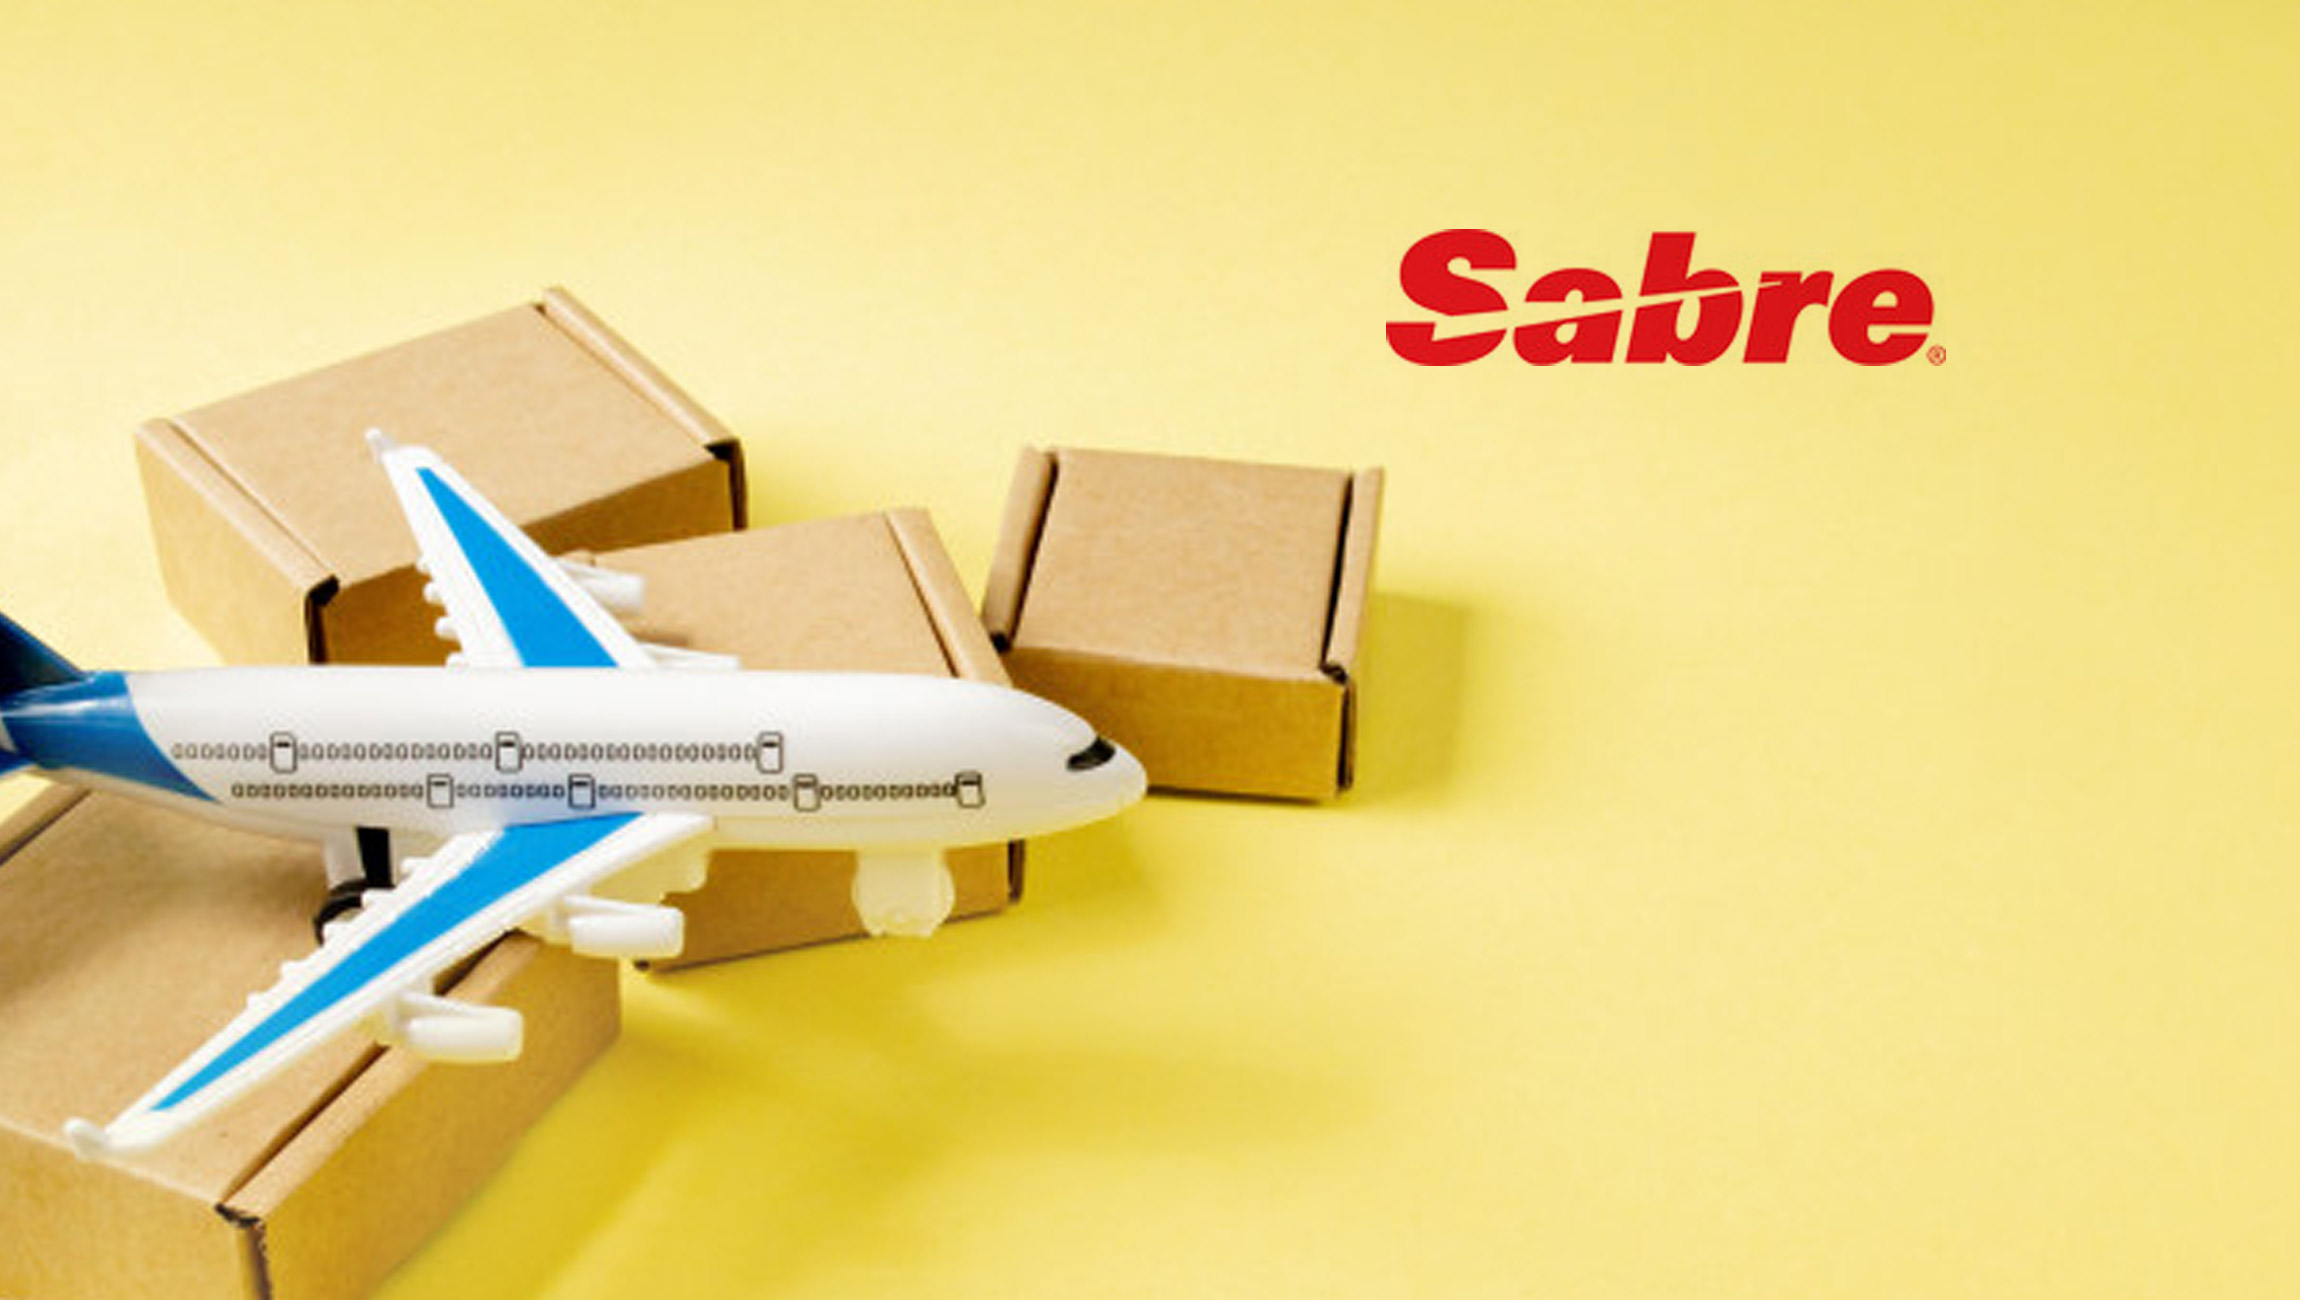 Sabre Introduces Retail Intelligence, Enabling Airlines to Grow Revenue Opportunities Through Personalized Retailing